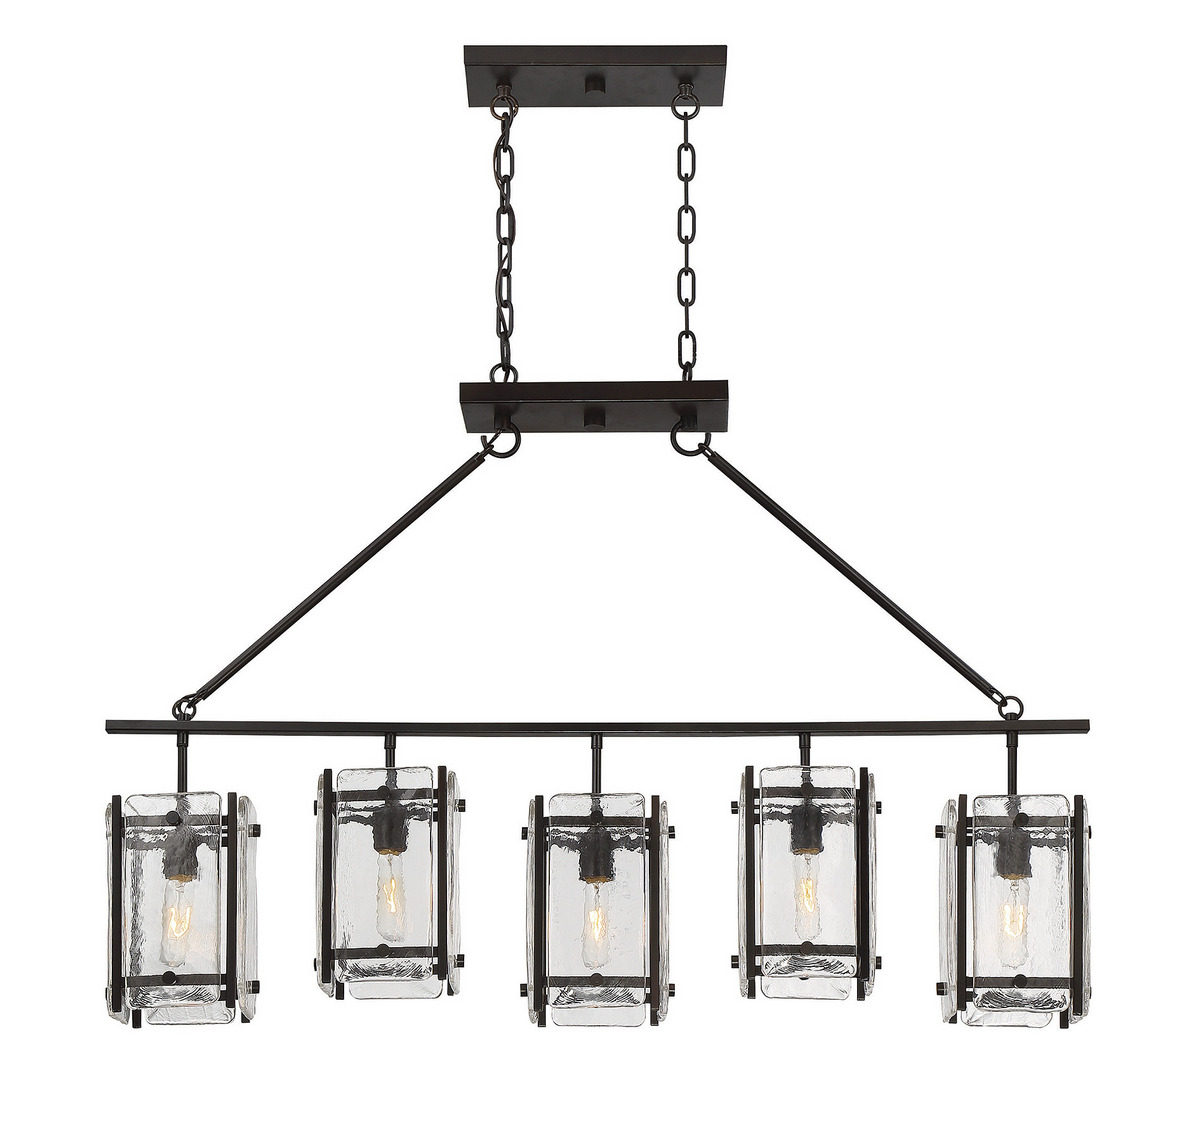 Glenwood by Brian Thomas 5-Light Linear Chandelier in English Bronze - Savoy House 1-3043-5-13